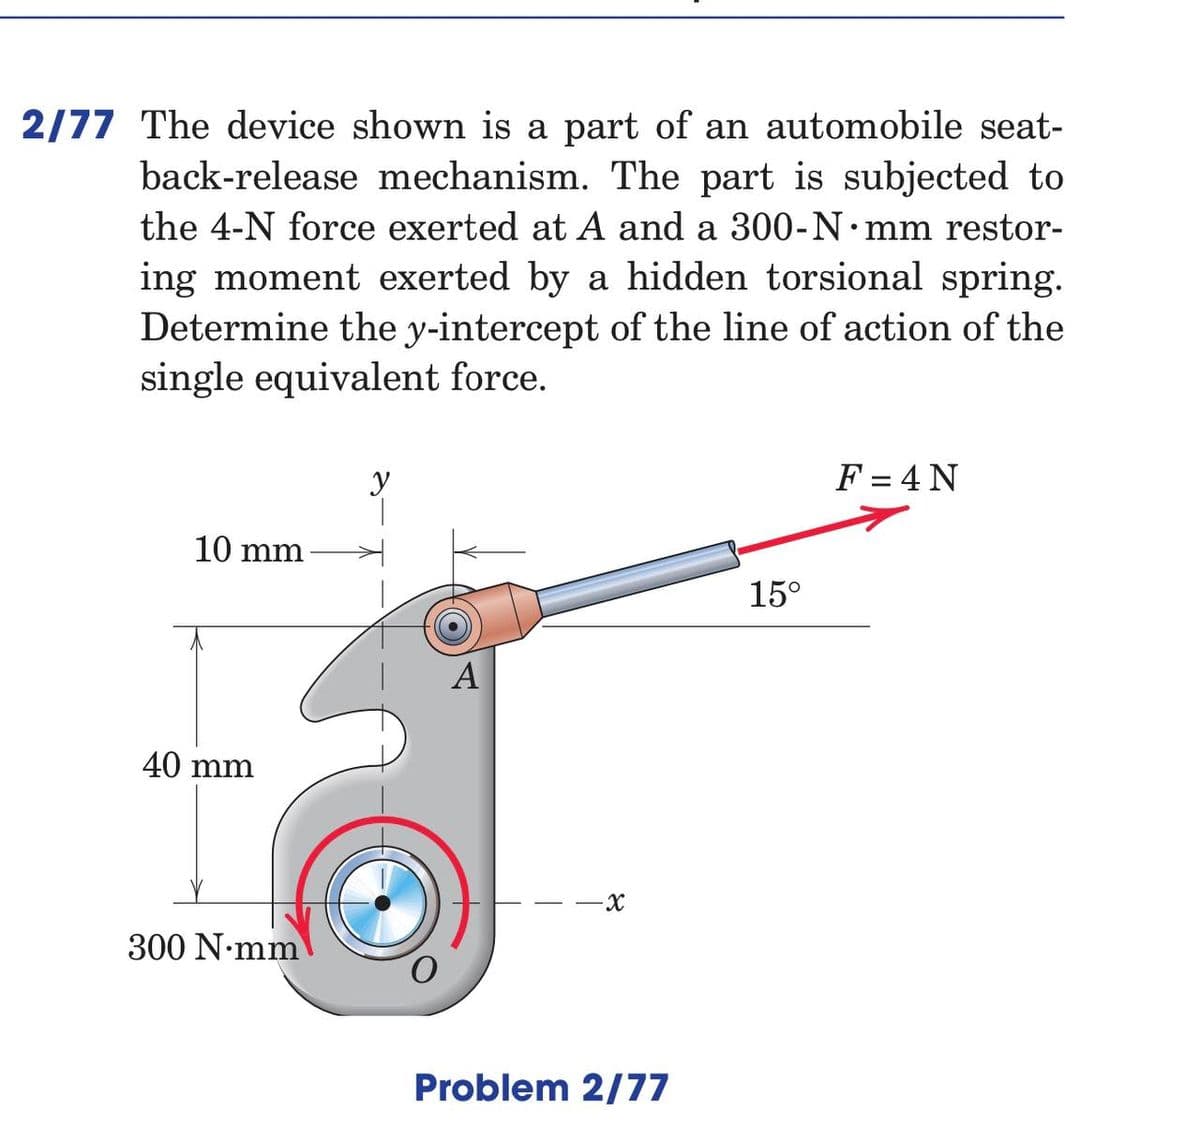 2/77 The device shown is a part of an automobile seat-
back-release mechanism. The part is subjected to
the 4-N force exerted at A and a 300-N•mm restor-
ing moment exerted by a hidden torsional spring.
Determine the y-intercept of the line of action of the
single equivalent force.
F = 4 N
10 mm
15°
A
40 mm
300 N•mm
Problem 2/77
